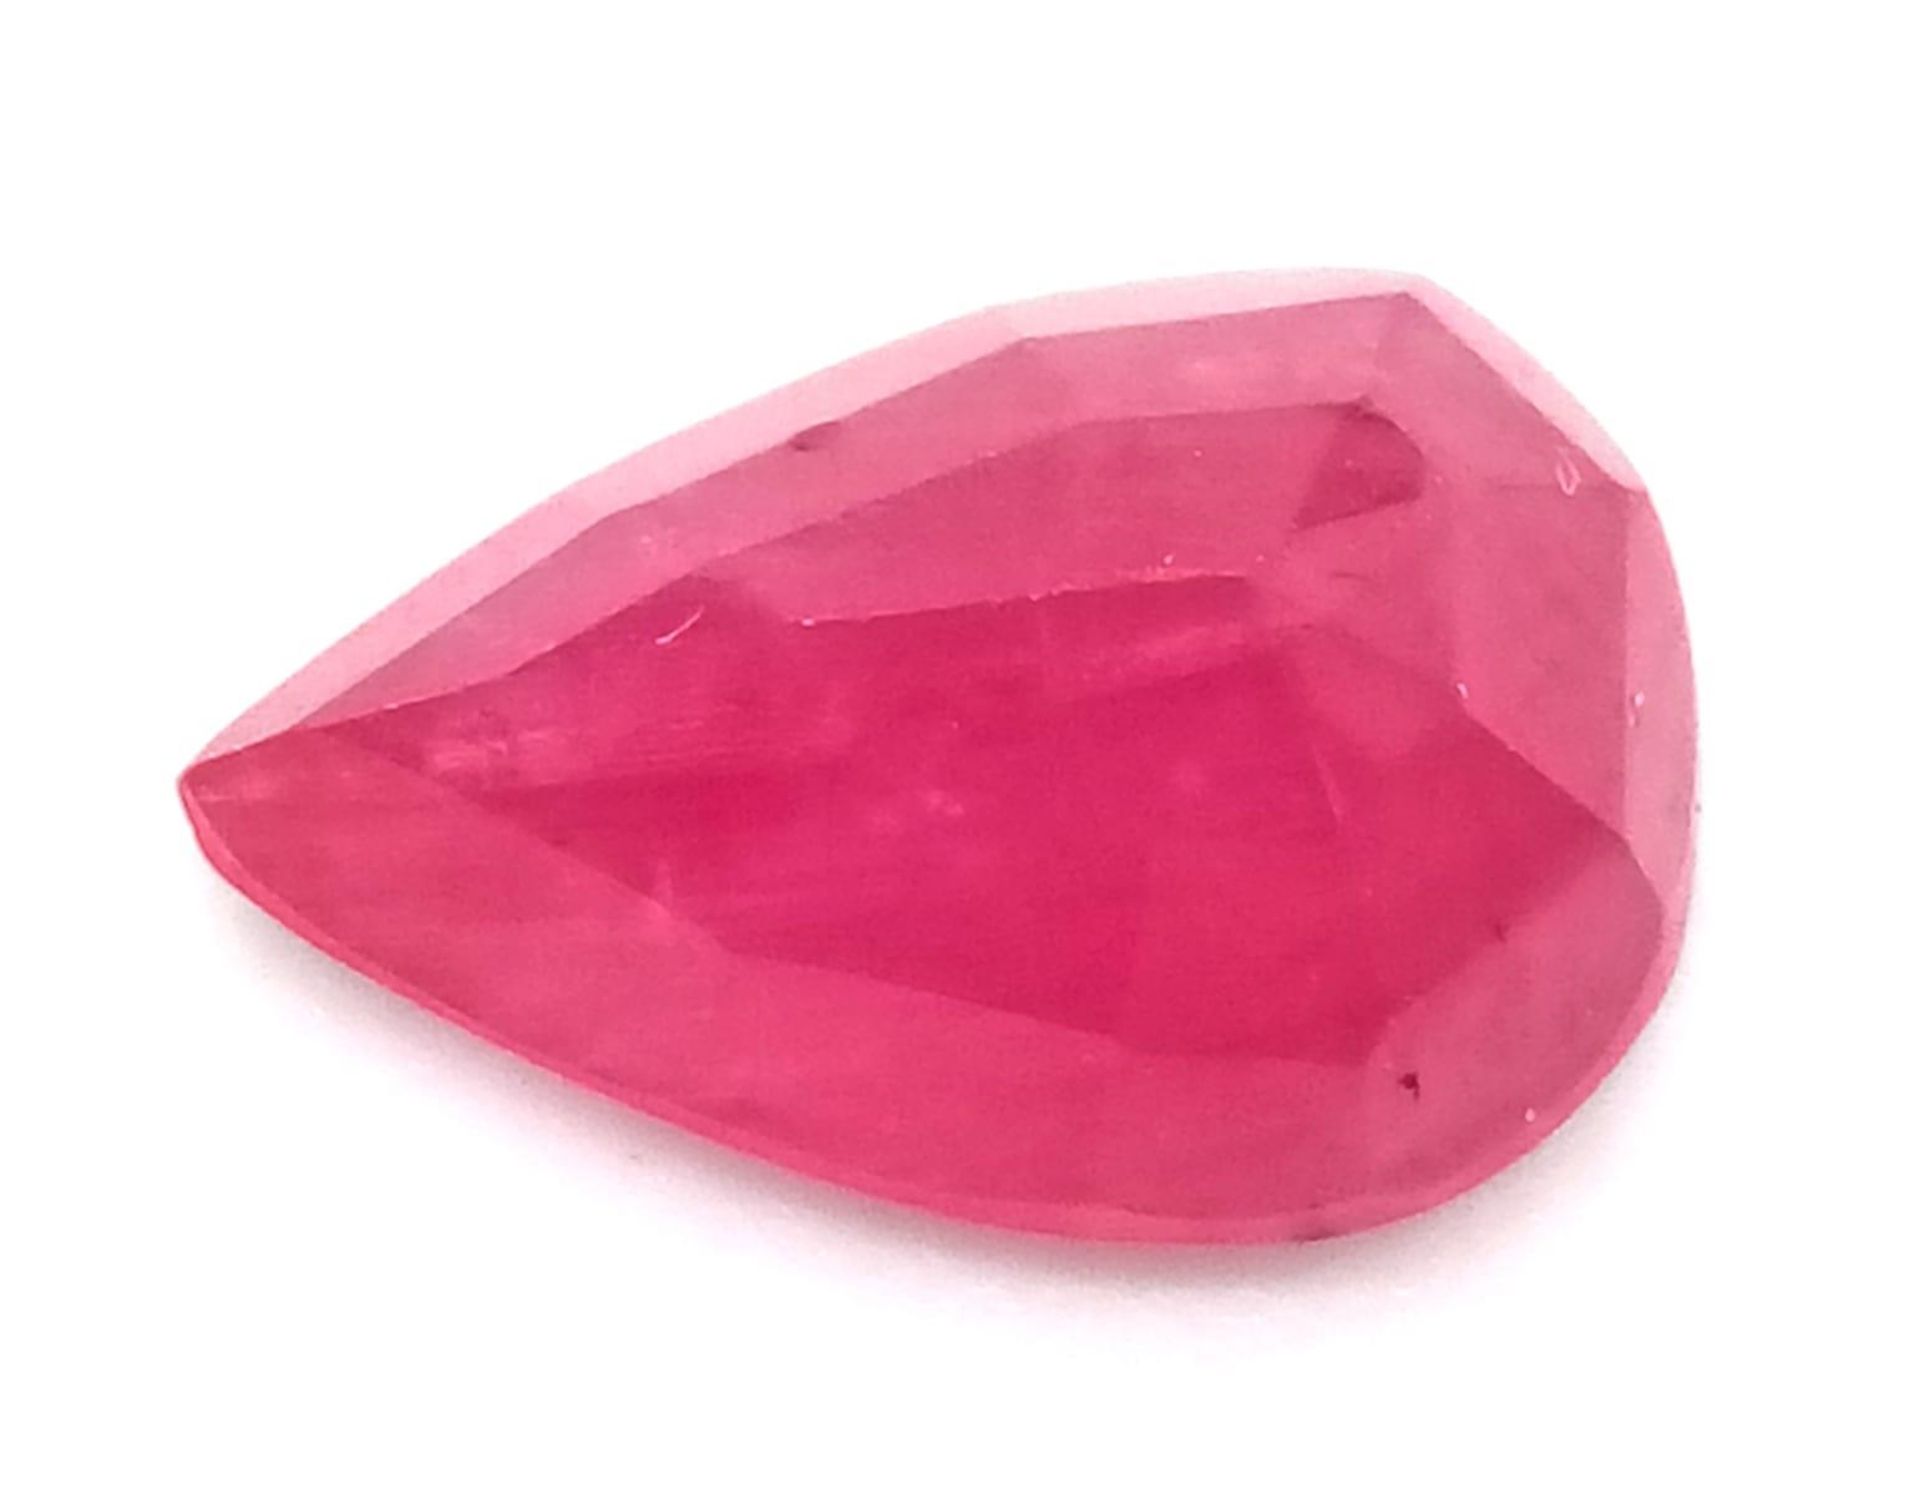 A 3.11ct Rare Mozambique Ruby Gemstone. GFCO Swiss Certified. - Image 3 of 4